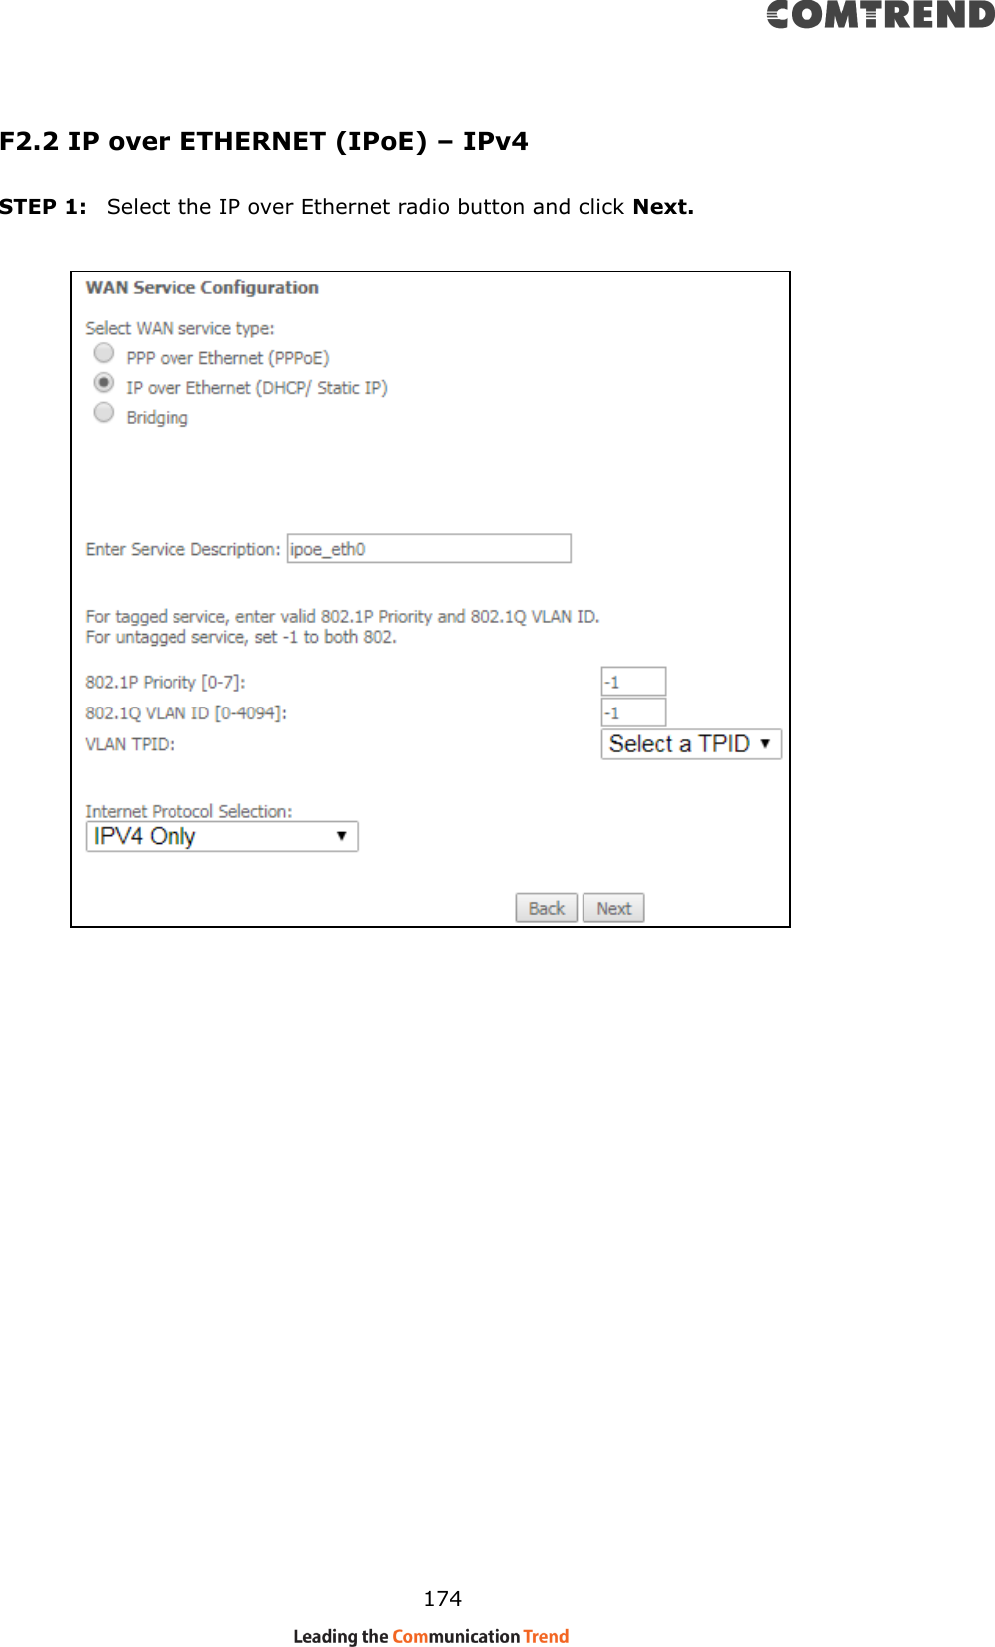    174 F2.2 IP over ETHERNET (IPoE) – IPv4 STEP 1:  Select the IP over Ethernet radio button and click Next.             